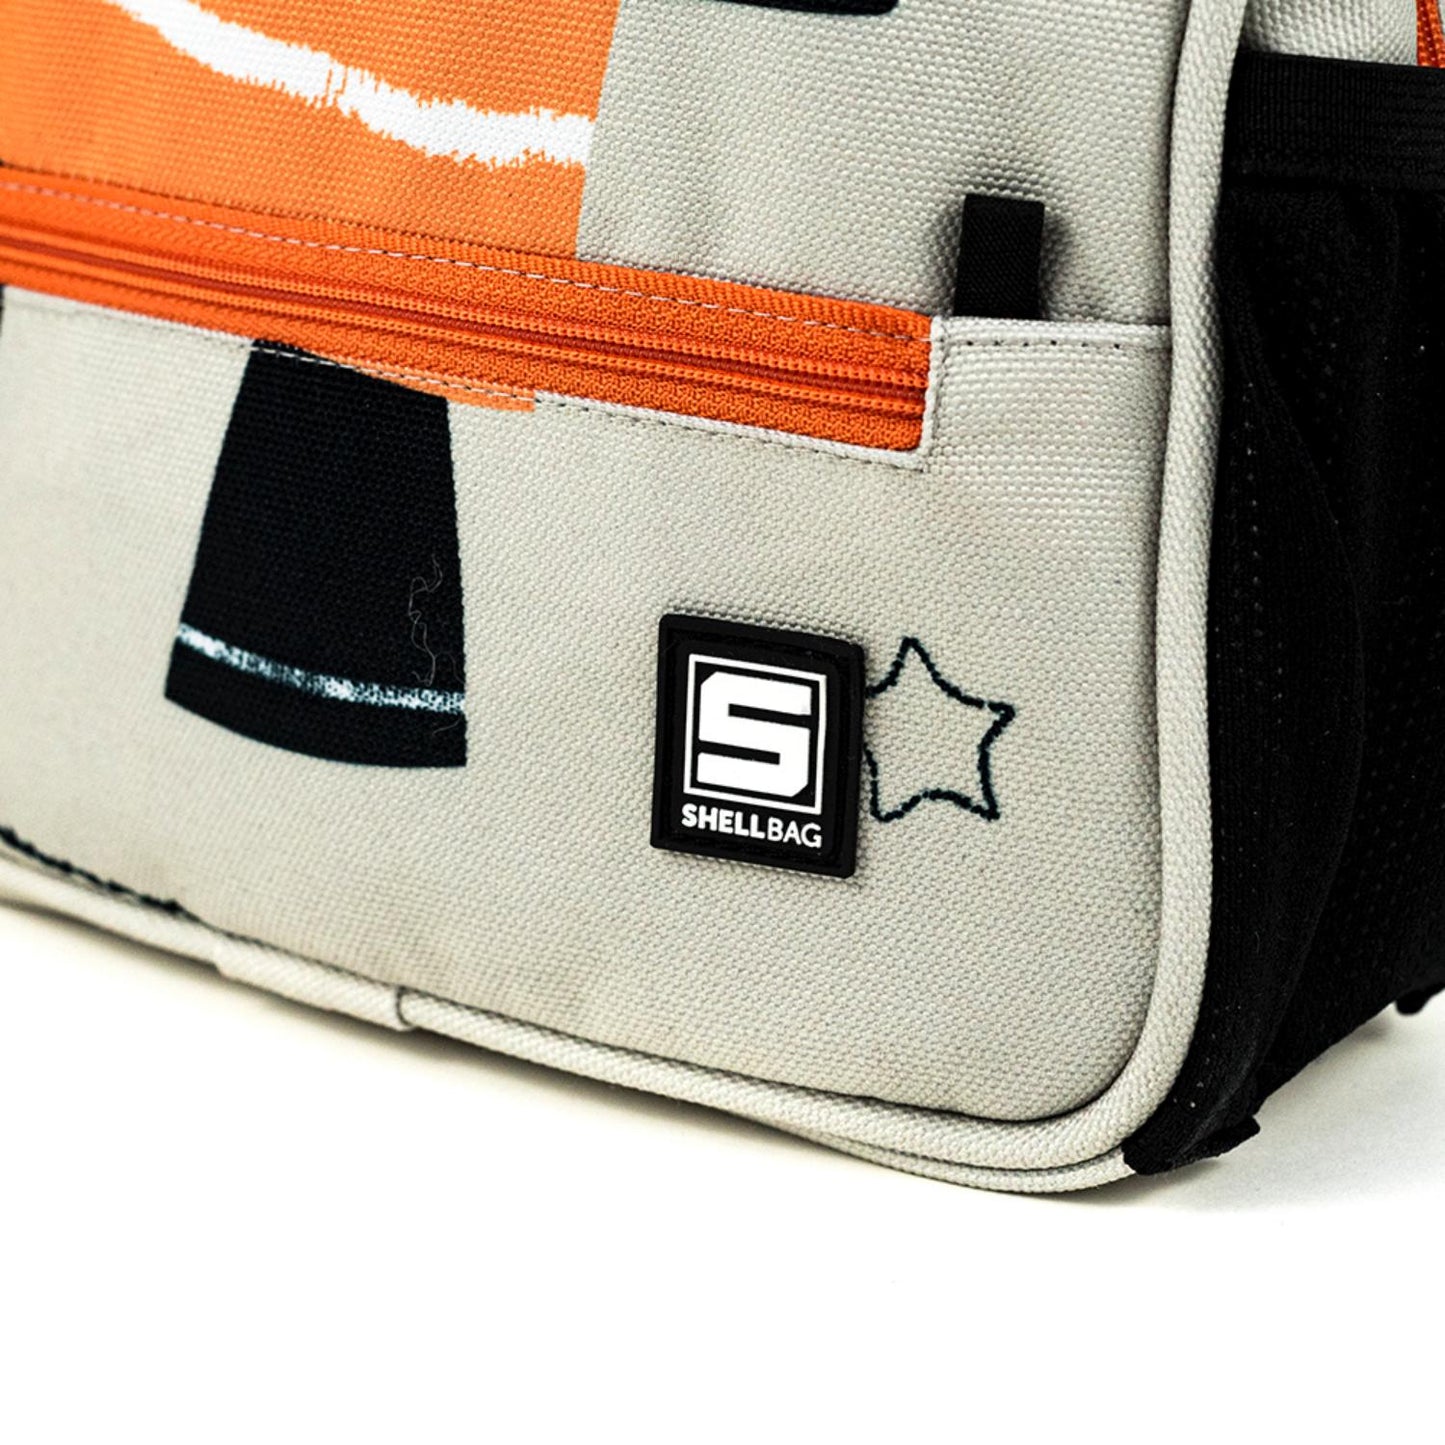 Shellbag Space Rocket Mini Backpack | Kid’s Backpack for Creche, Nursery & School | Closeup - Zip-up Front Pocket with Logo | BeoVERDE.ie